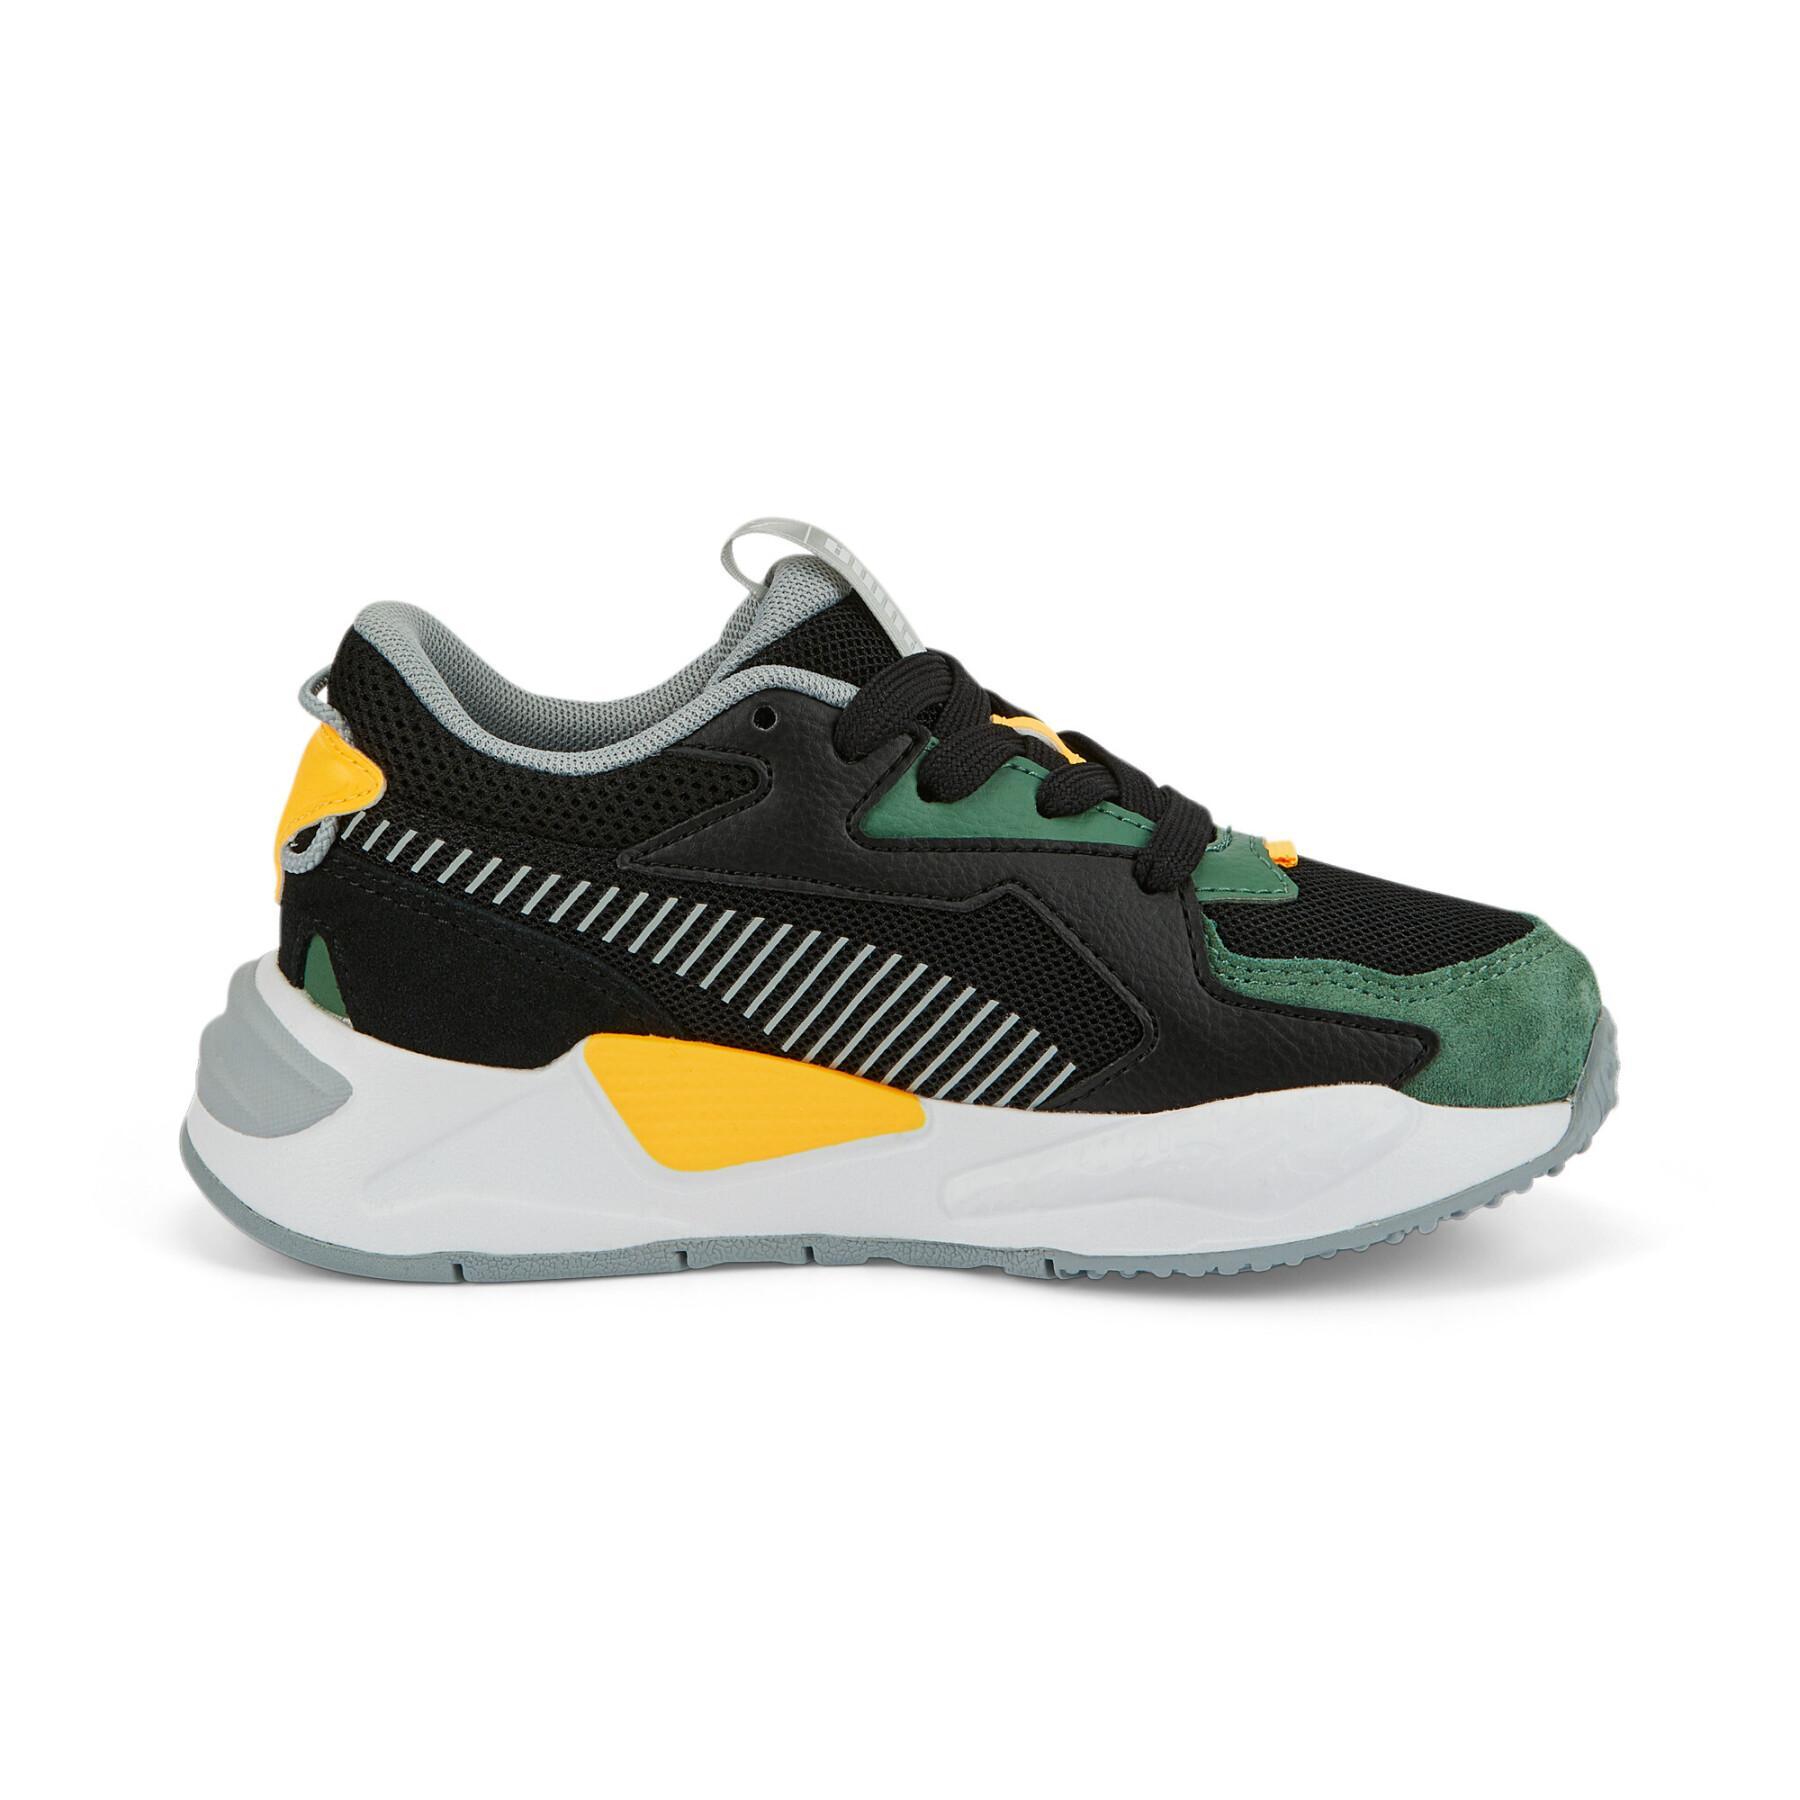 Children's sneakers Puma RS-Z Top PS